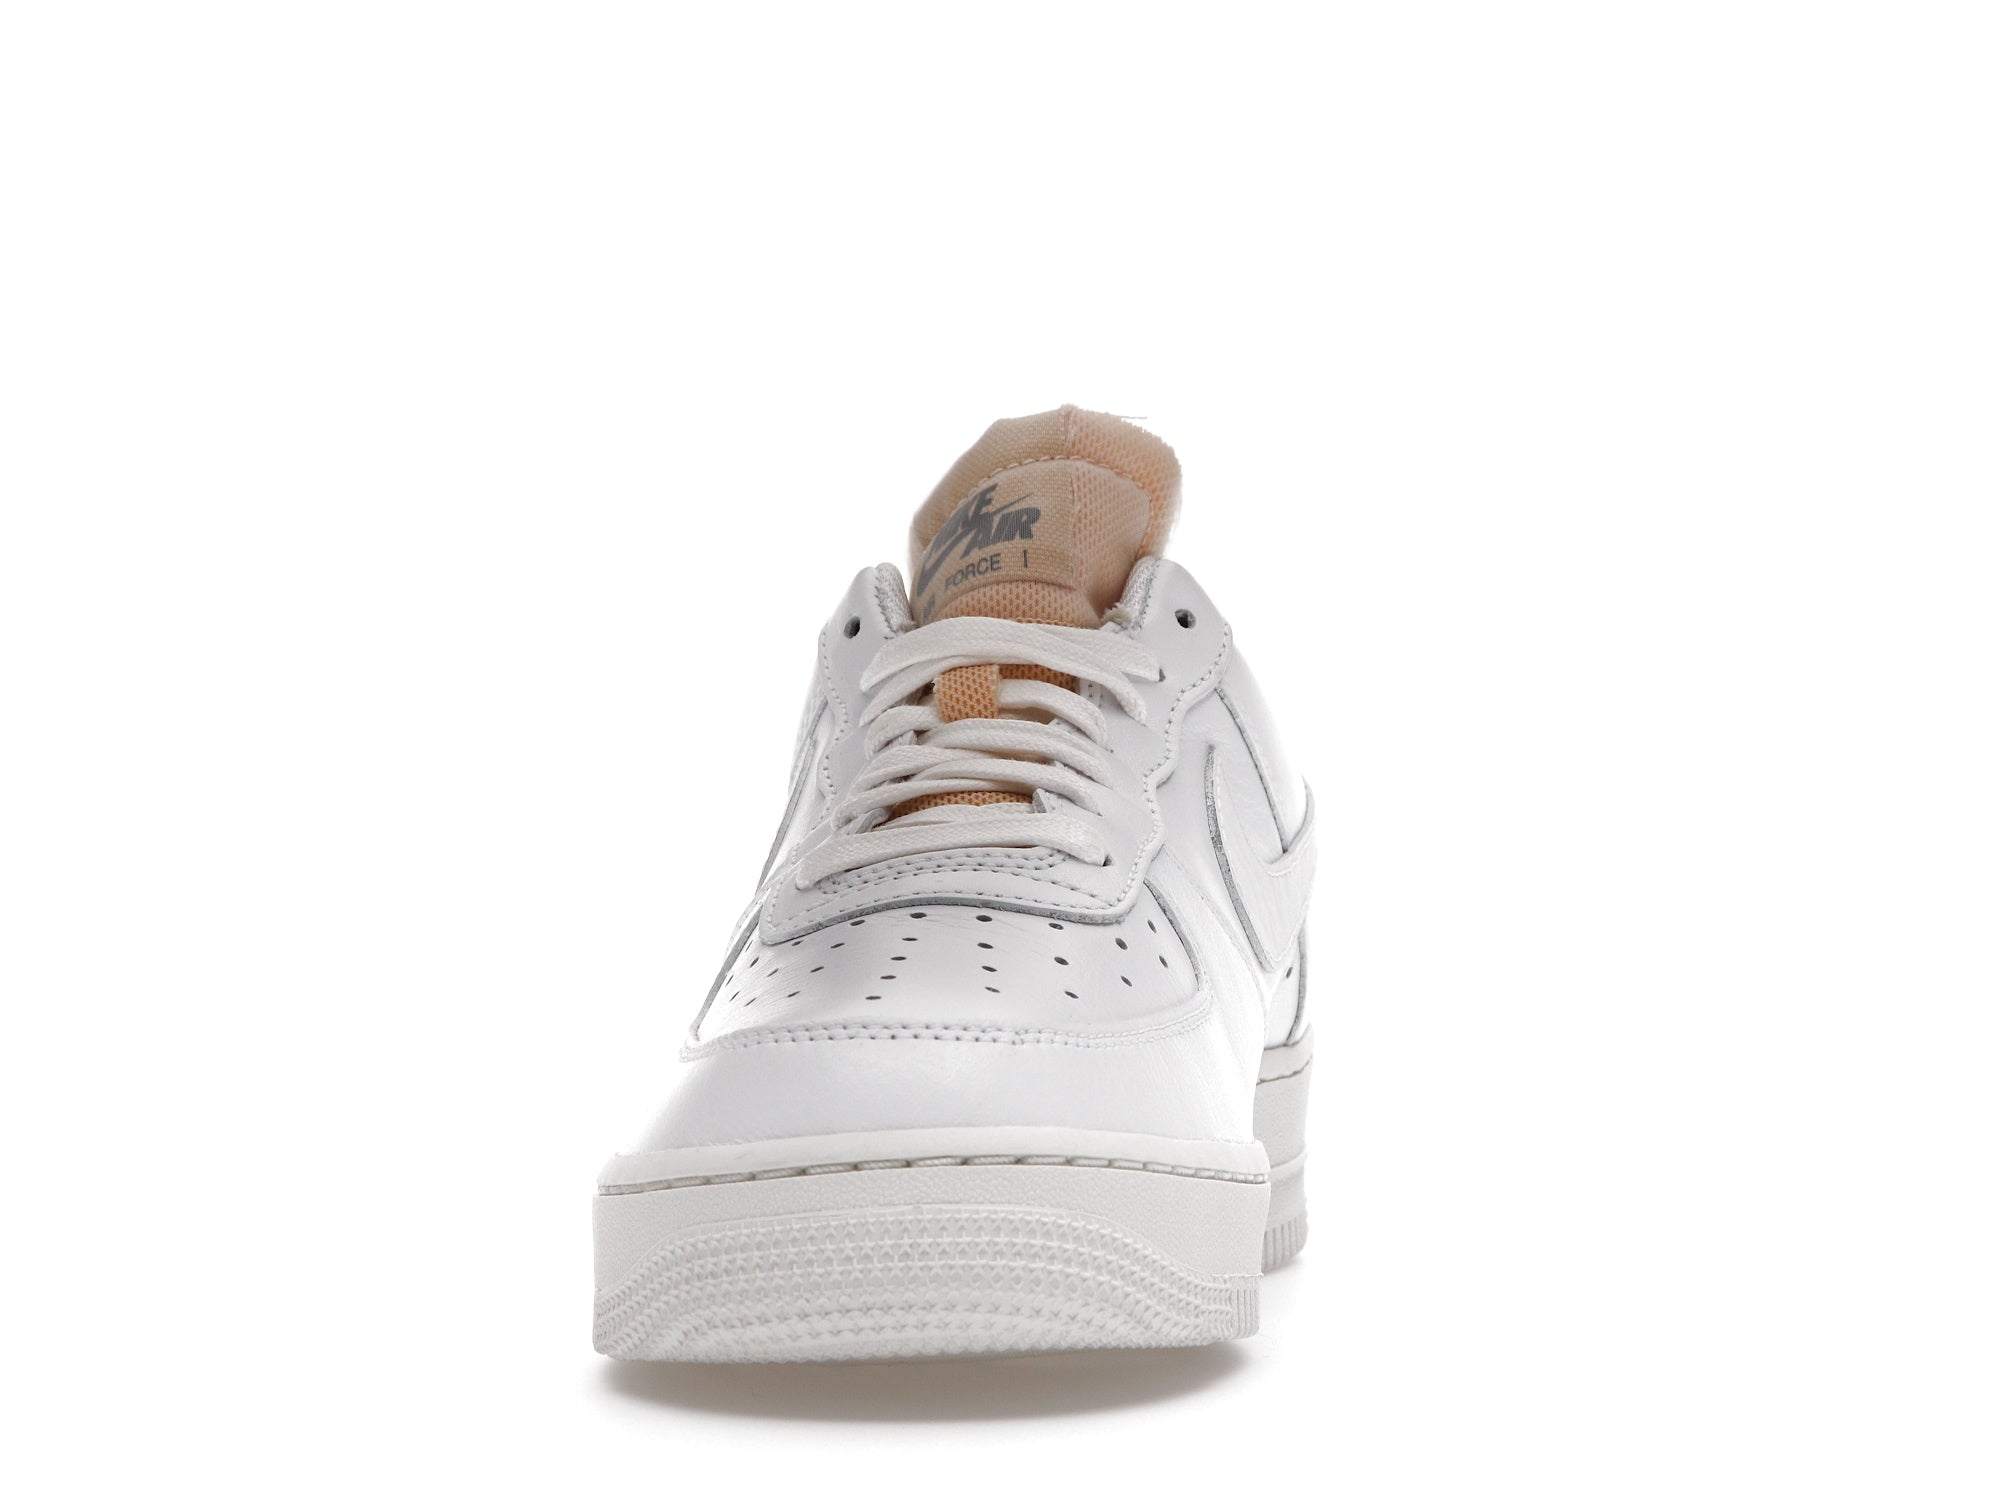 Nike Women's Air Force 1 Low '07 LX Bling